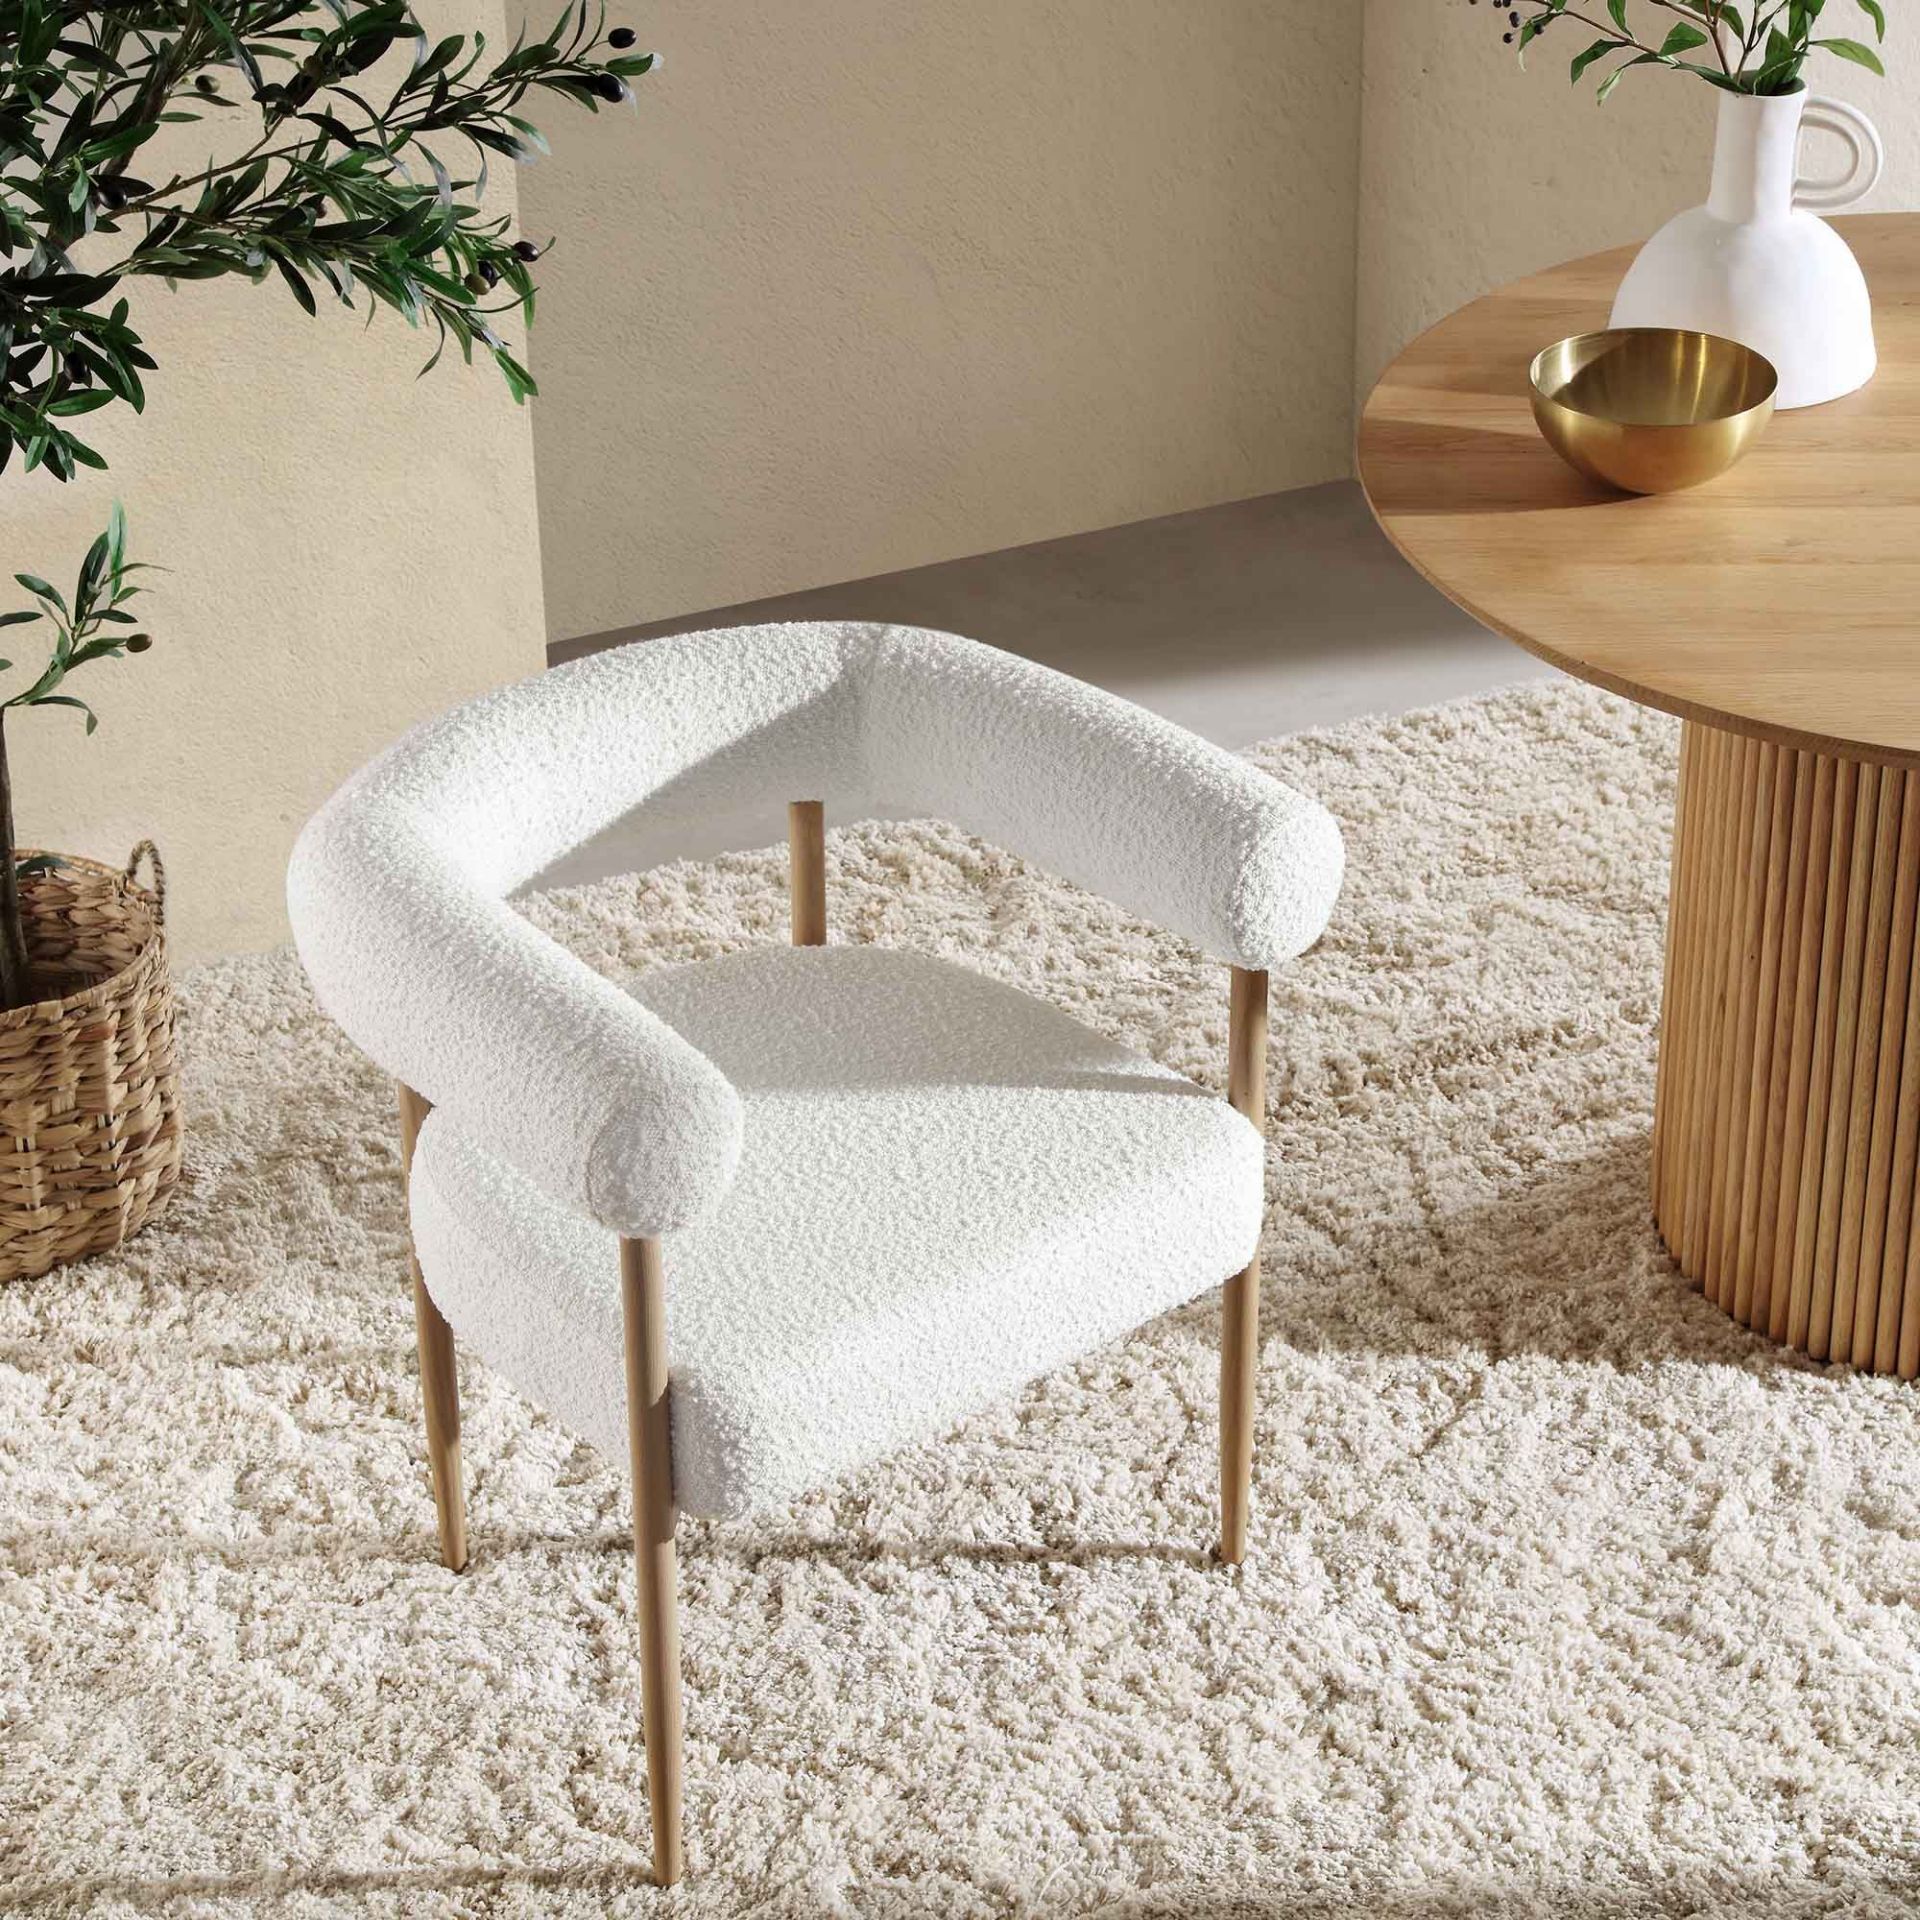 Fulbourn White Boucle Dining Chair with Natural Wood Effect Legs. - ER30. RRP £219.99. A cheerful - Image 2 of 2